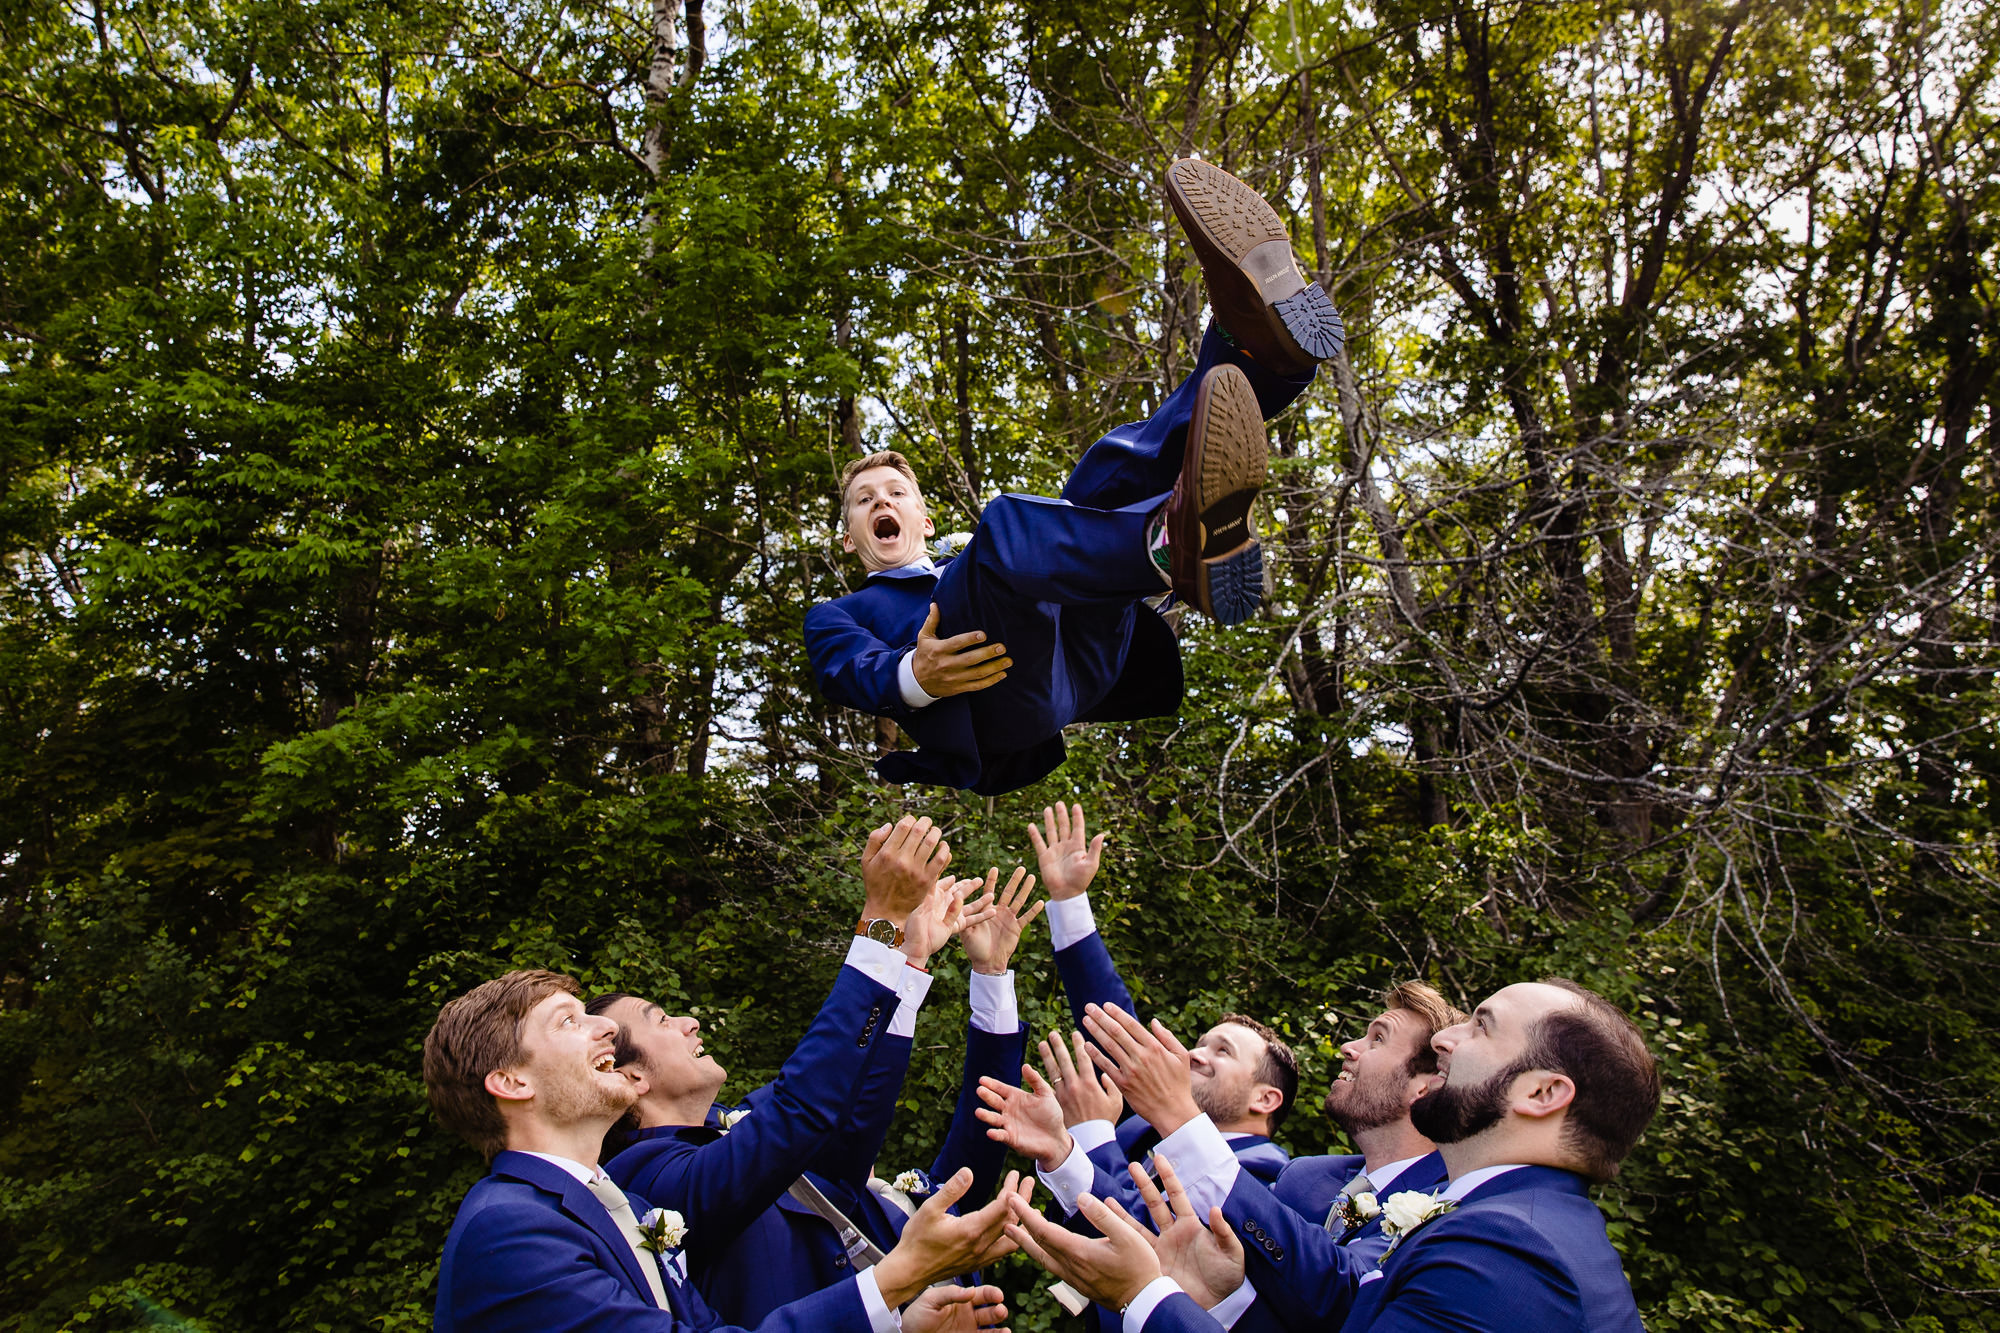 A groom is tossed up in the air by his groomsmen on his wedding day.